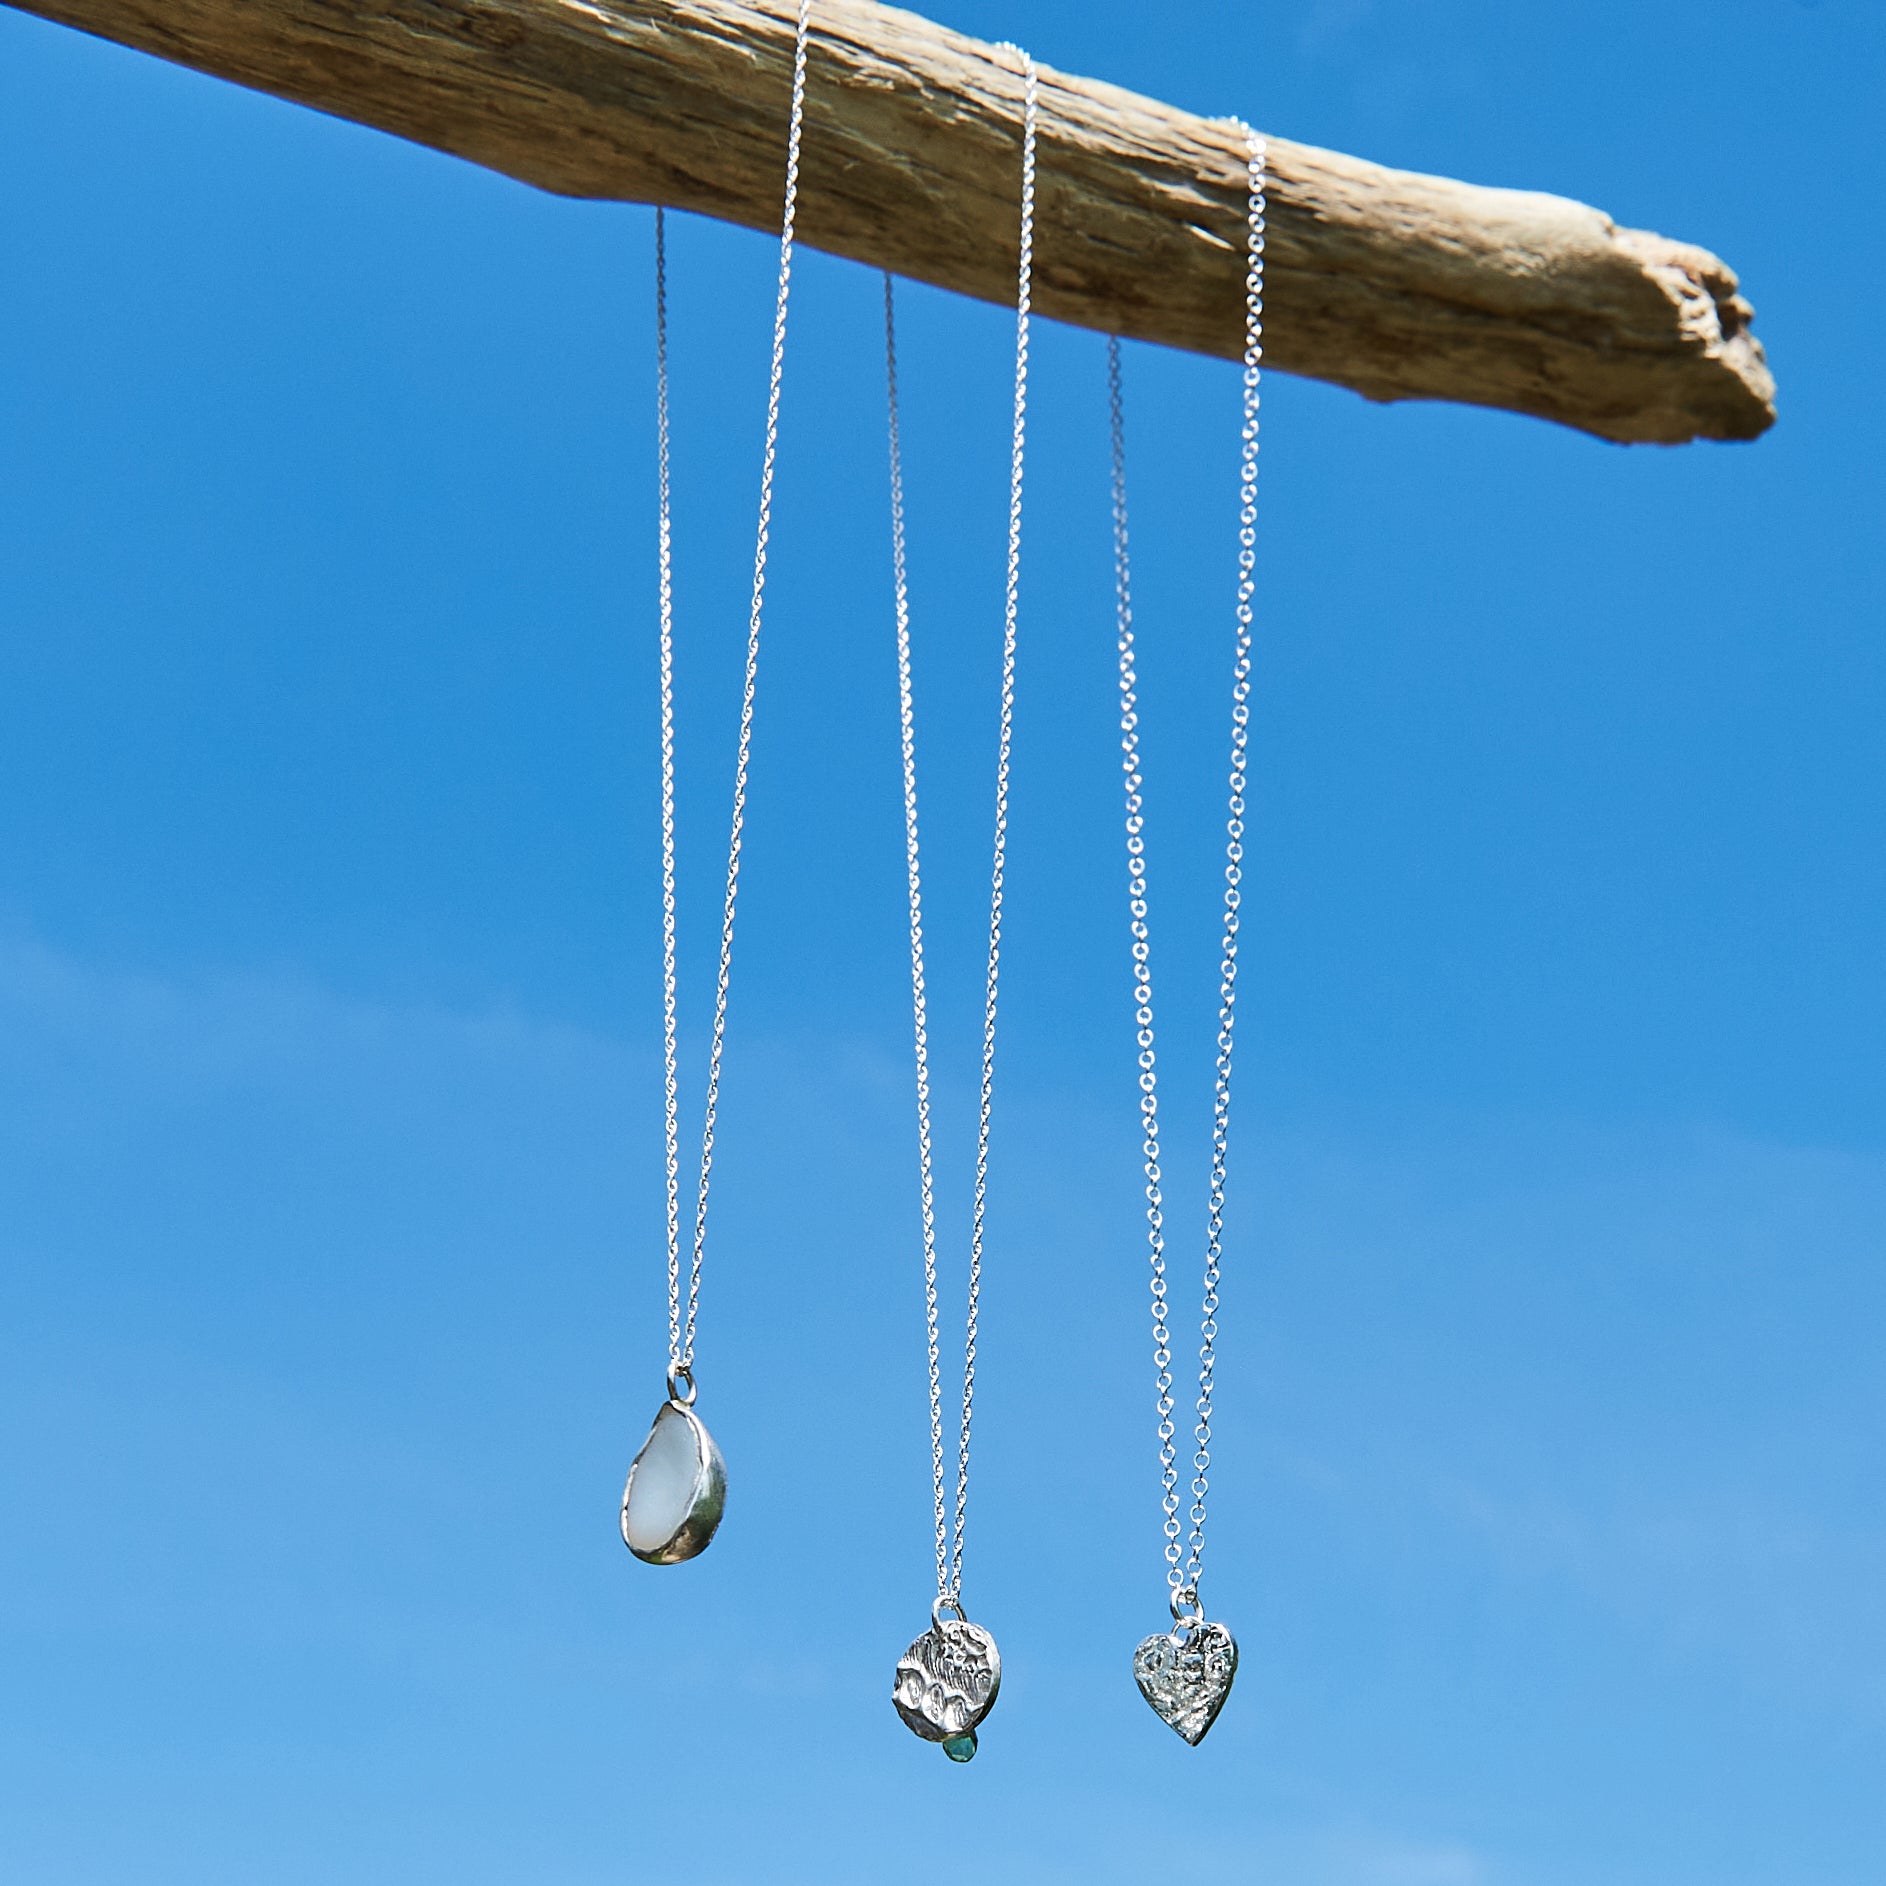 Forever Heart Silver Necklace - Love Beach Beads